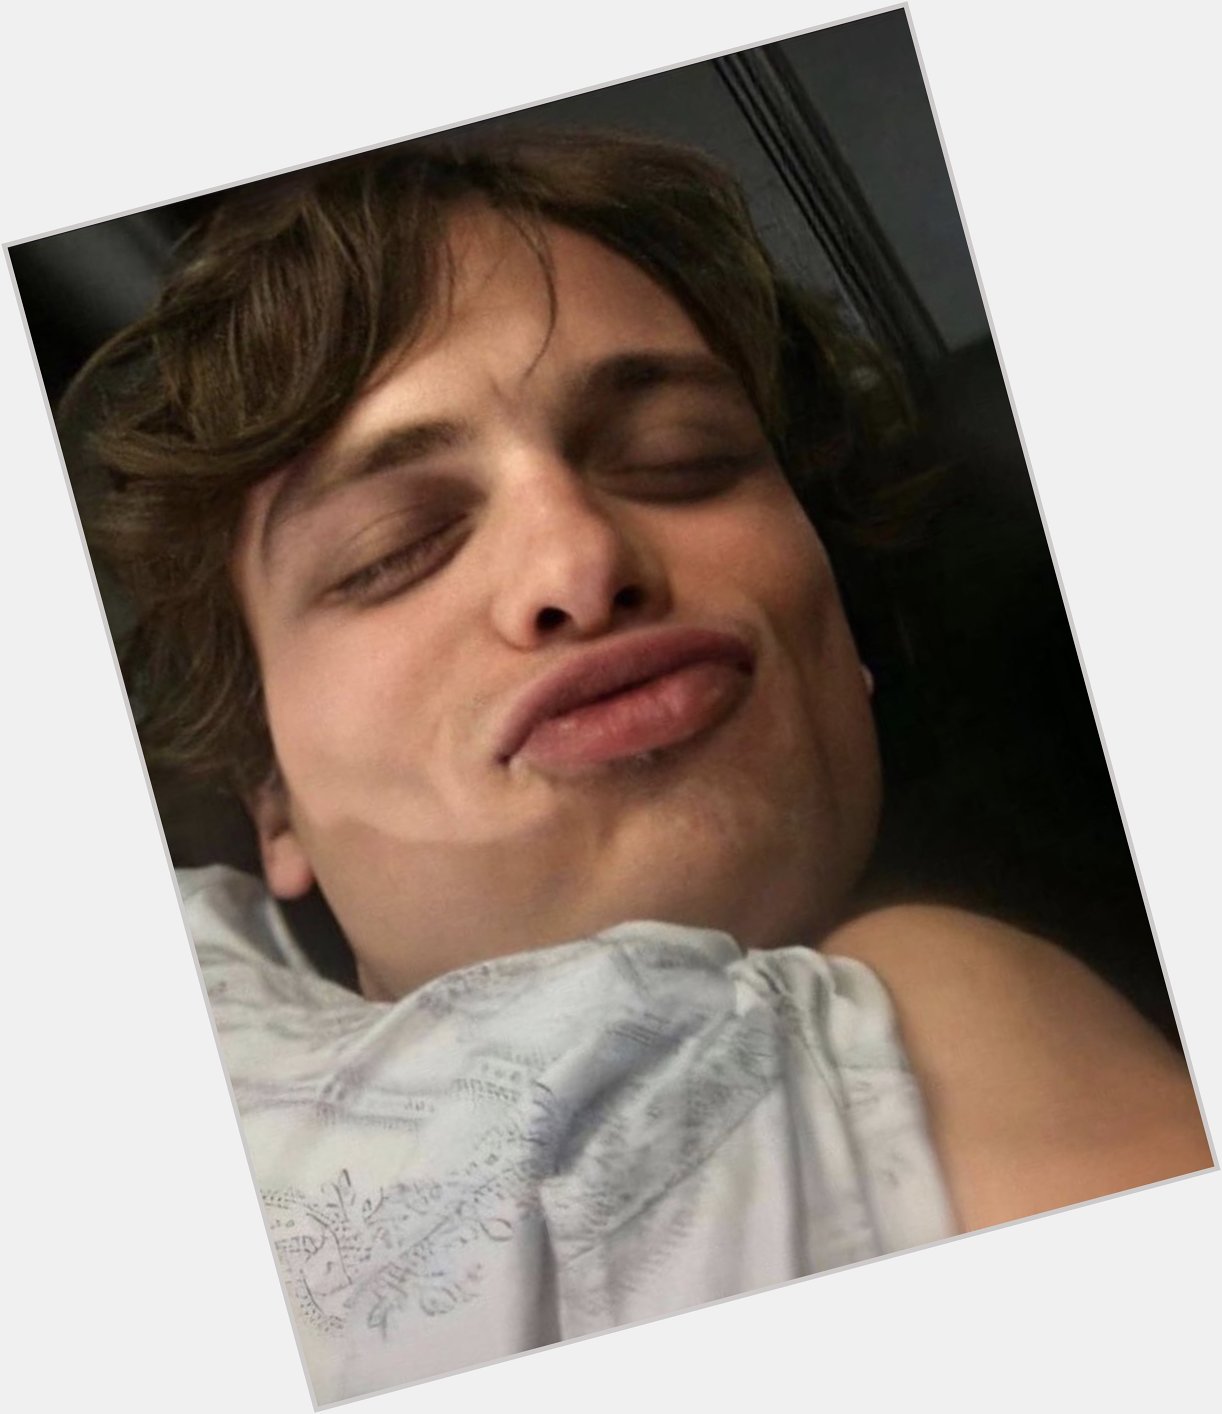 Happy birthday Matthew Gray Gubler, sorry assholes have to try to ruin it. We love you so much. 